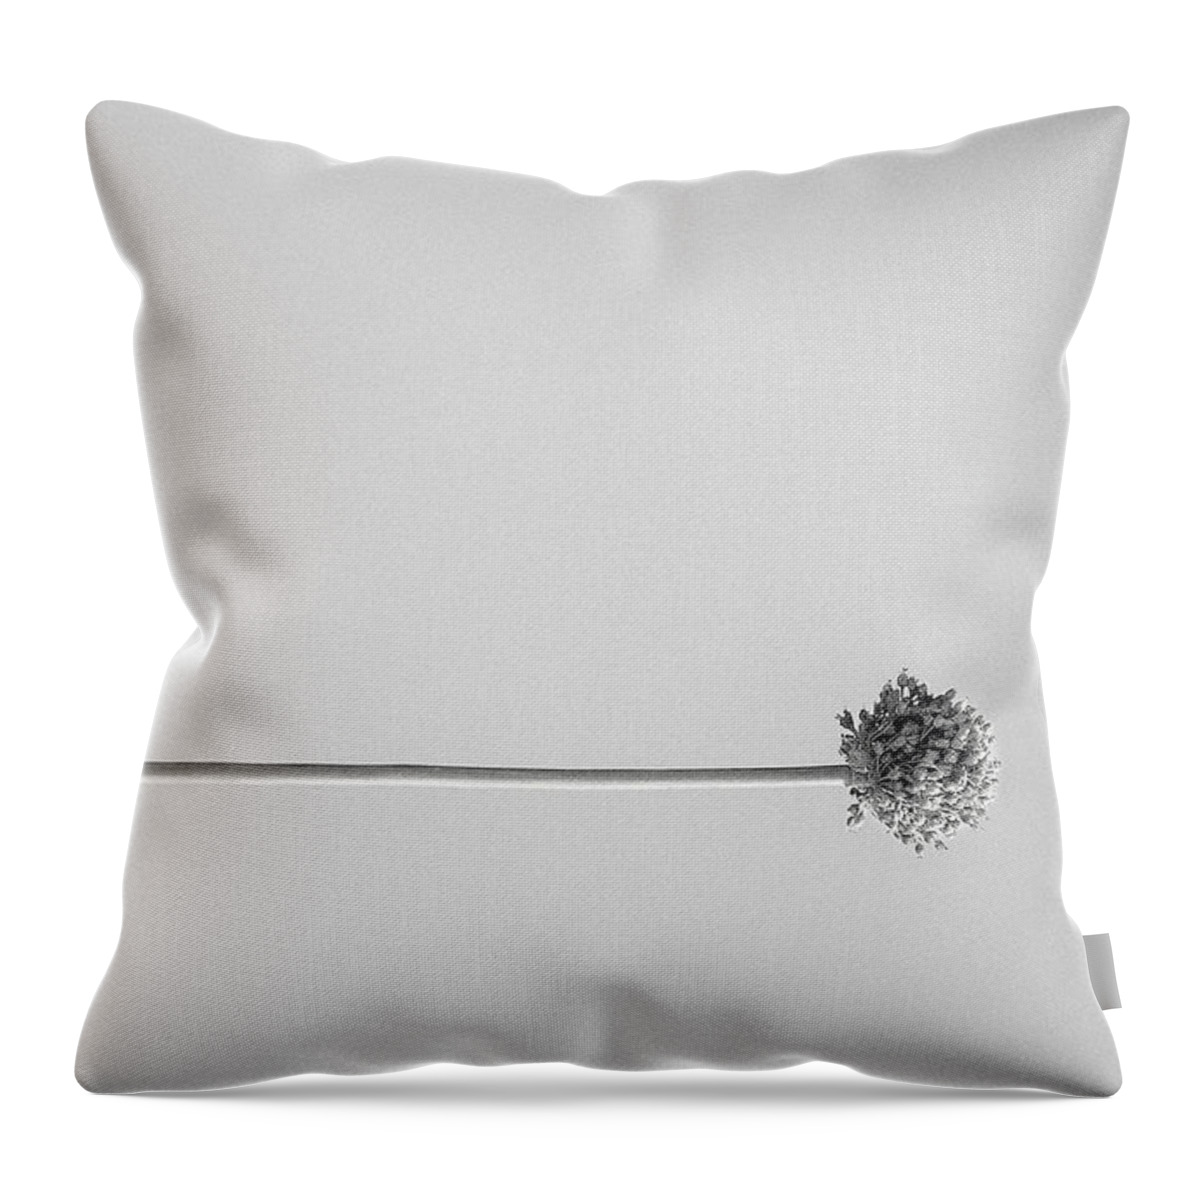 Black And White Flower Throw Pillow featuring the photograph Dry Flower - Black And White Art Photo by Modern Abstract